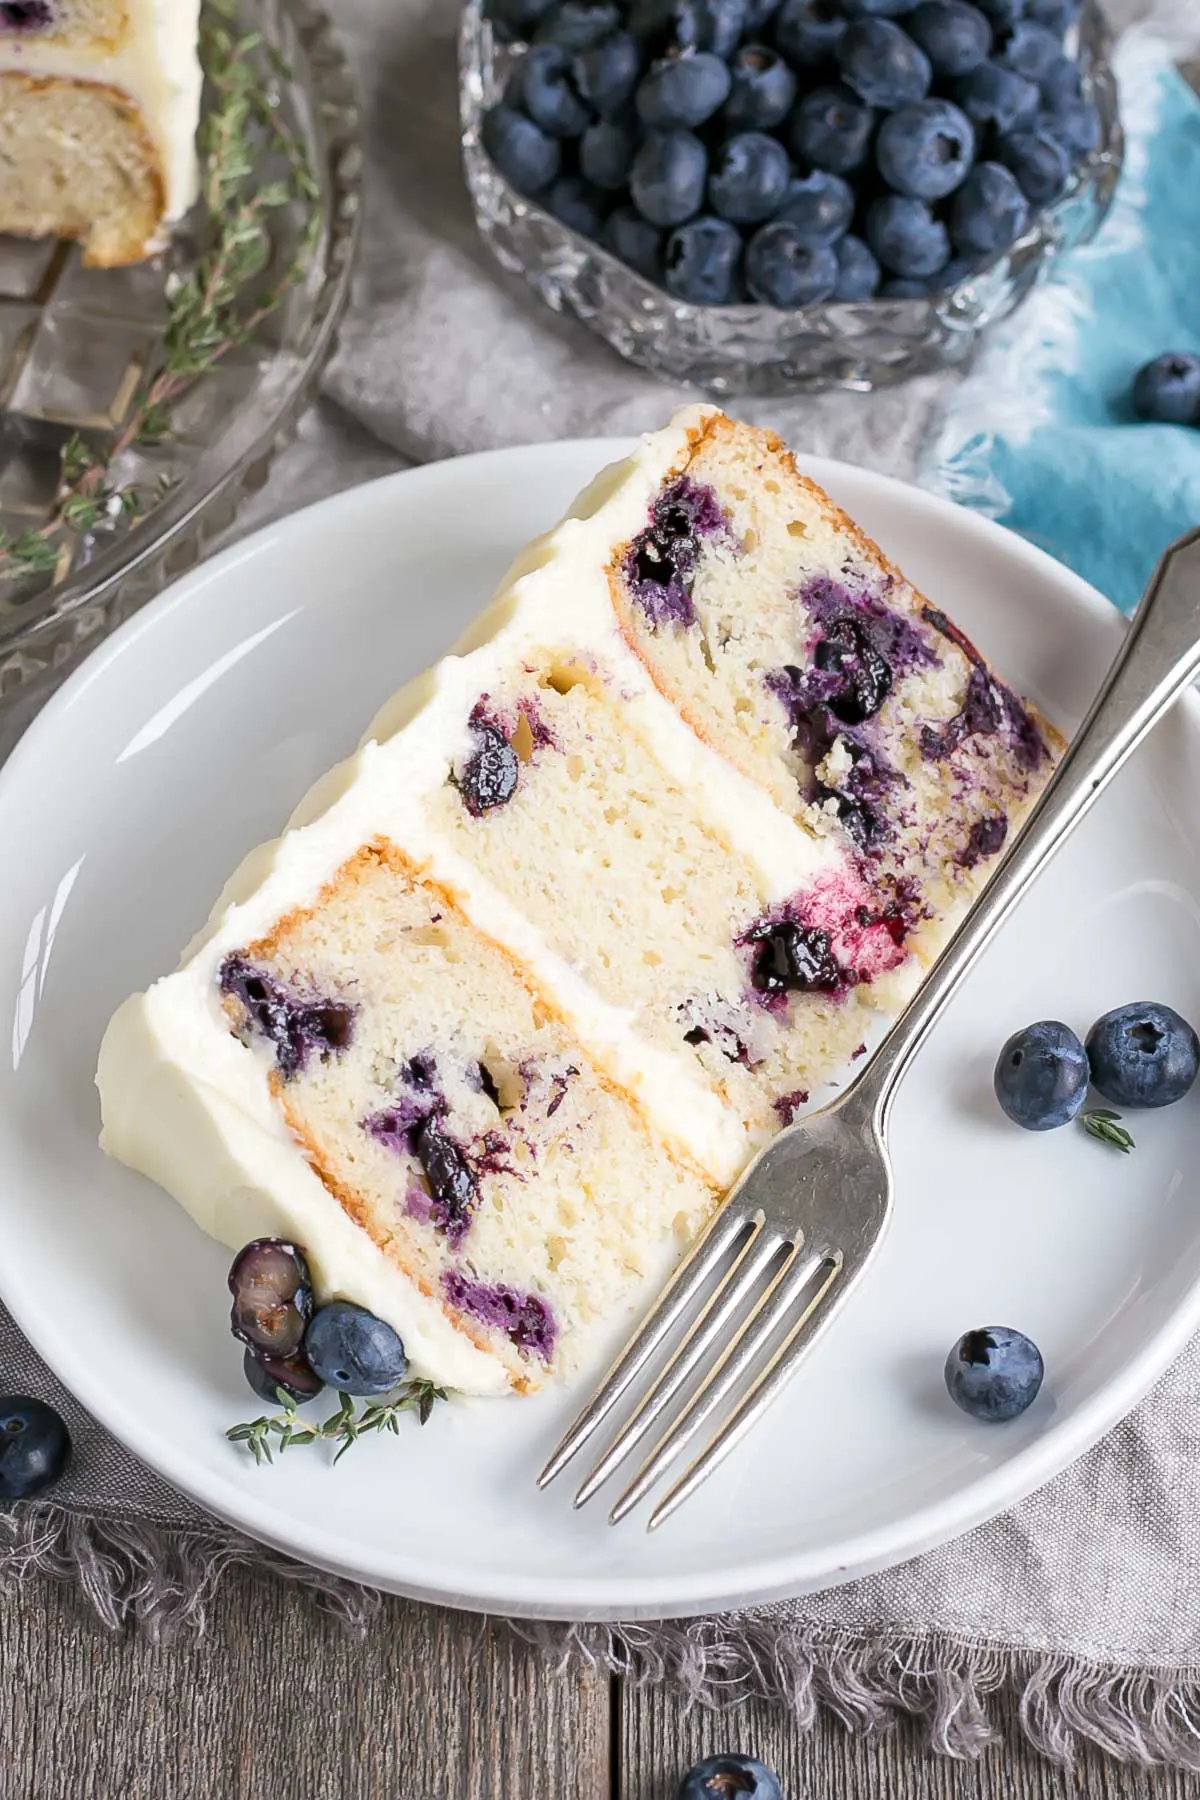 A cut slice of this Blueberry Banana Cake recipe.